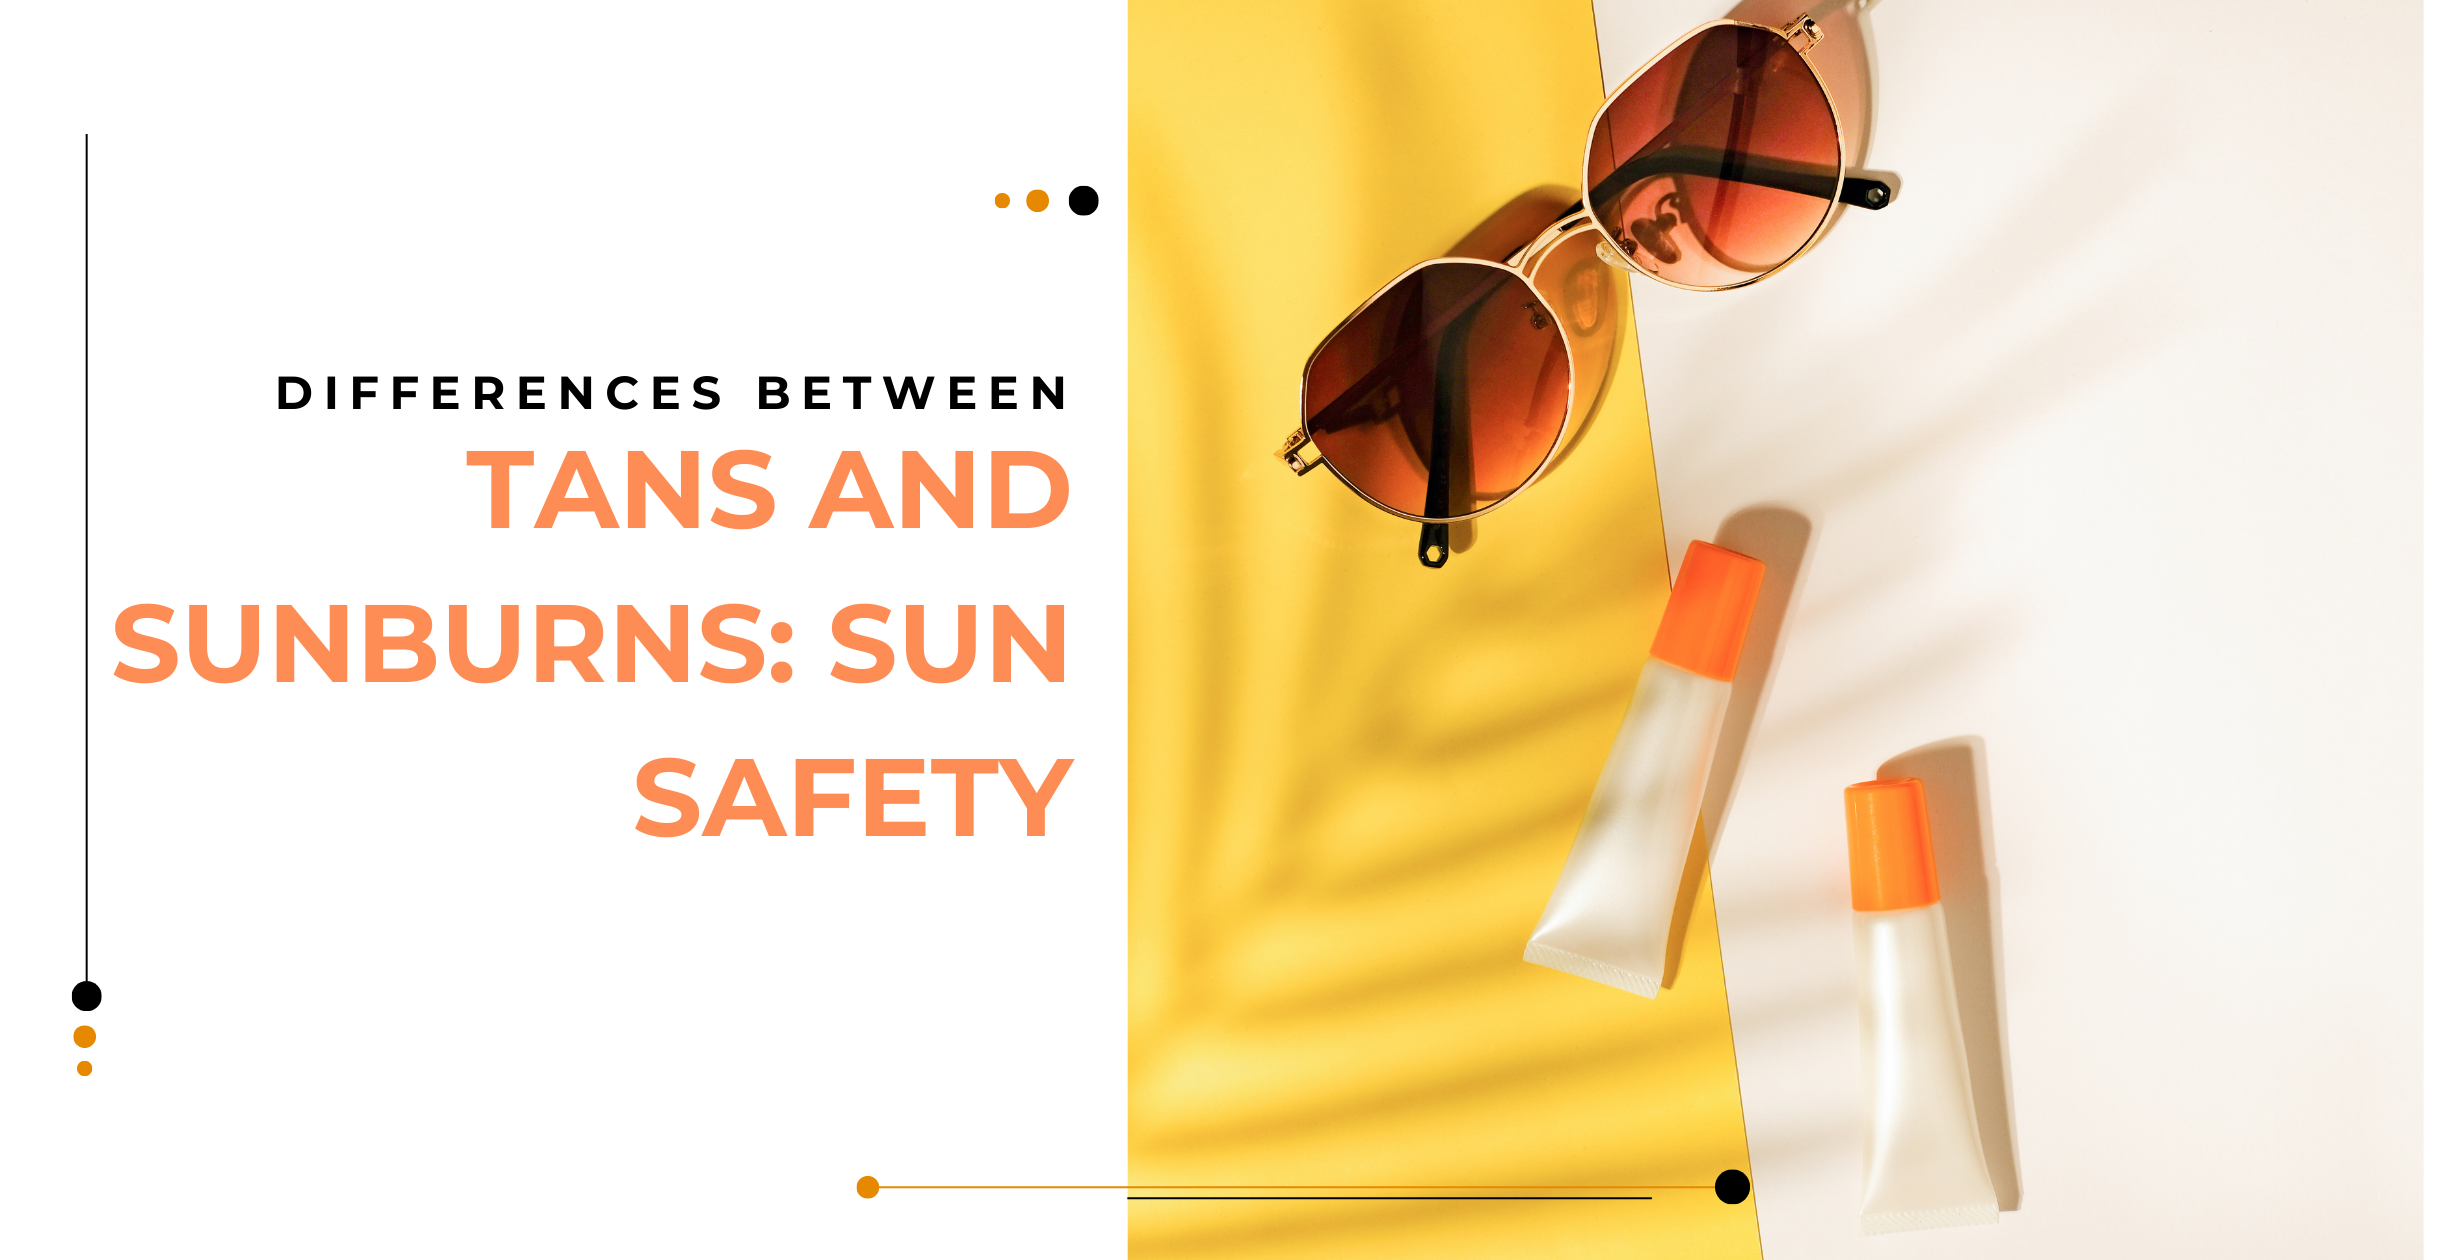 Differences Between Tans and Sunburns: Sun Safety